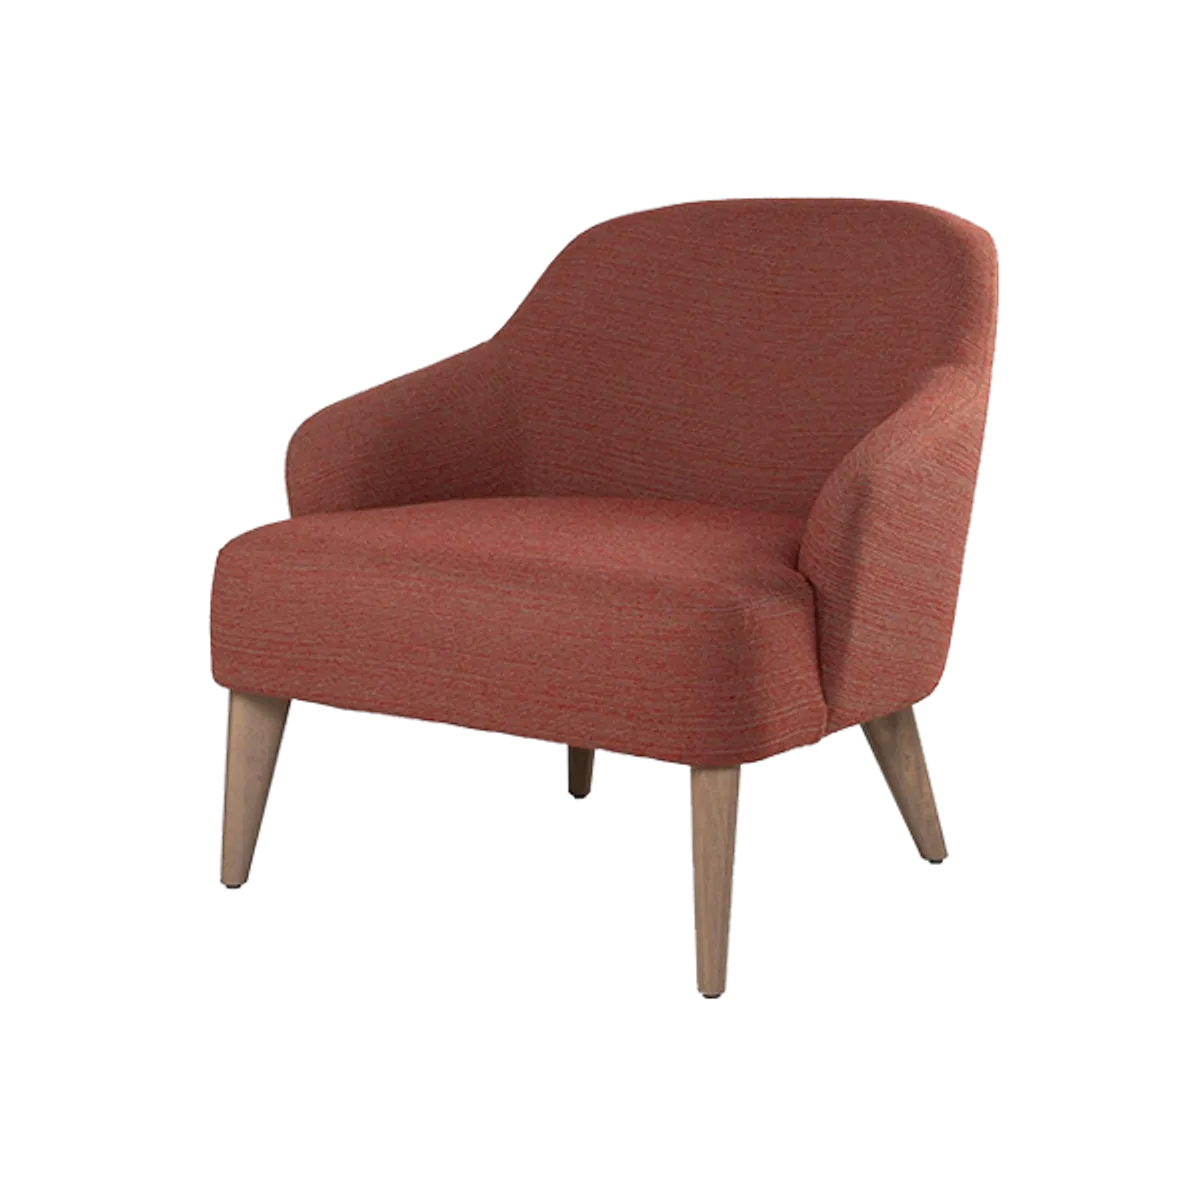 WEB Keat 3 lounge chair Upholstered hotel furniture by insideoutcontracts